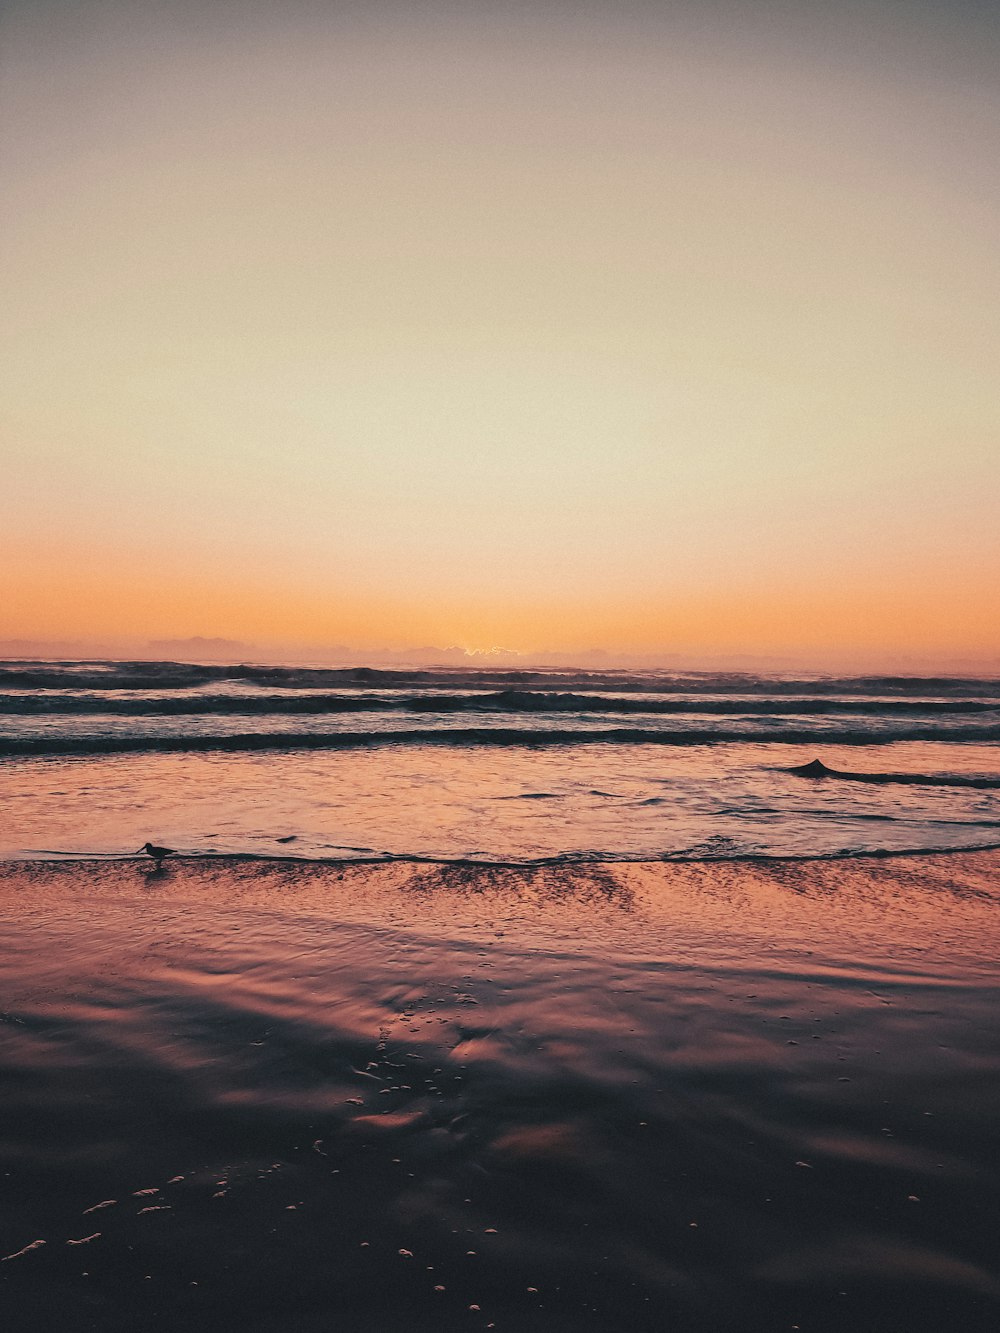 a beach with waves and a sunset